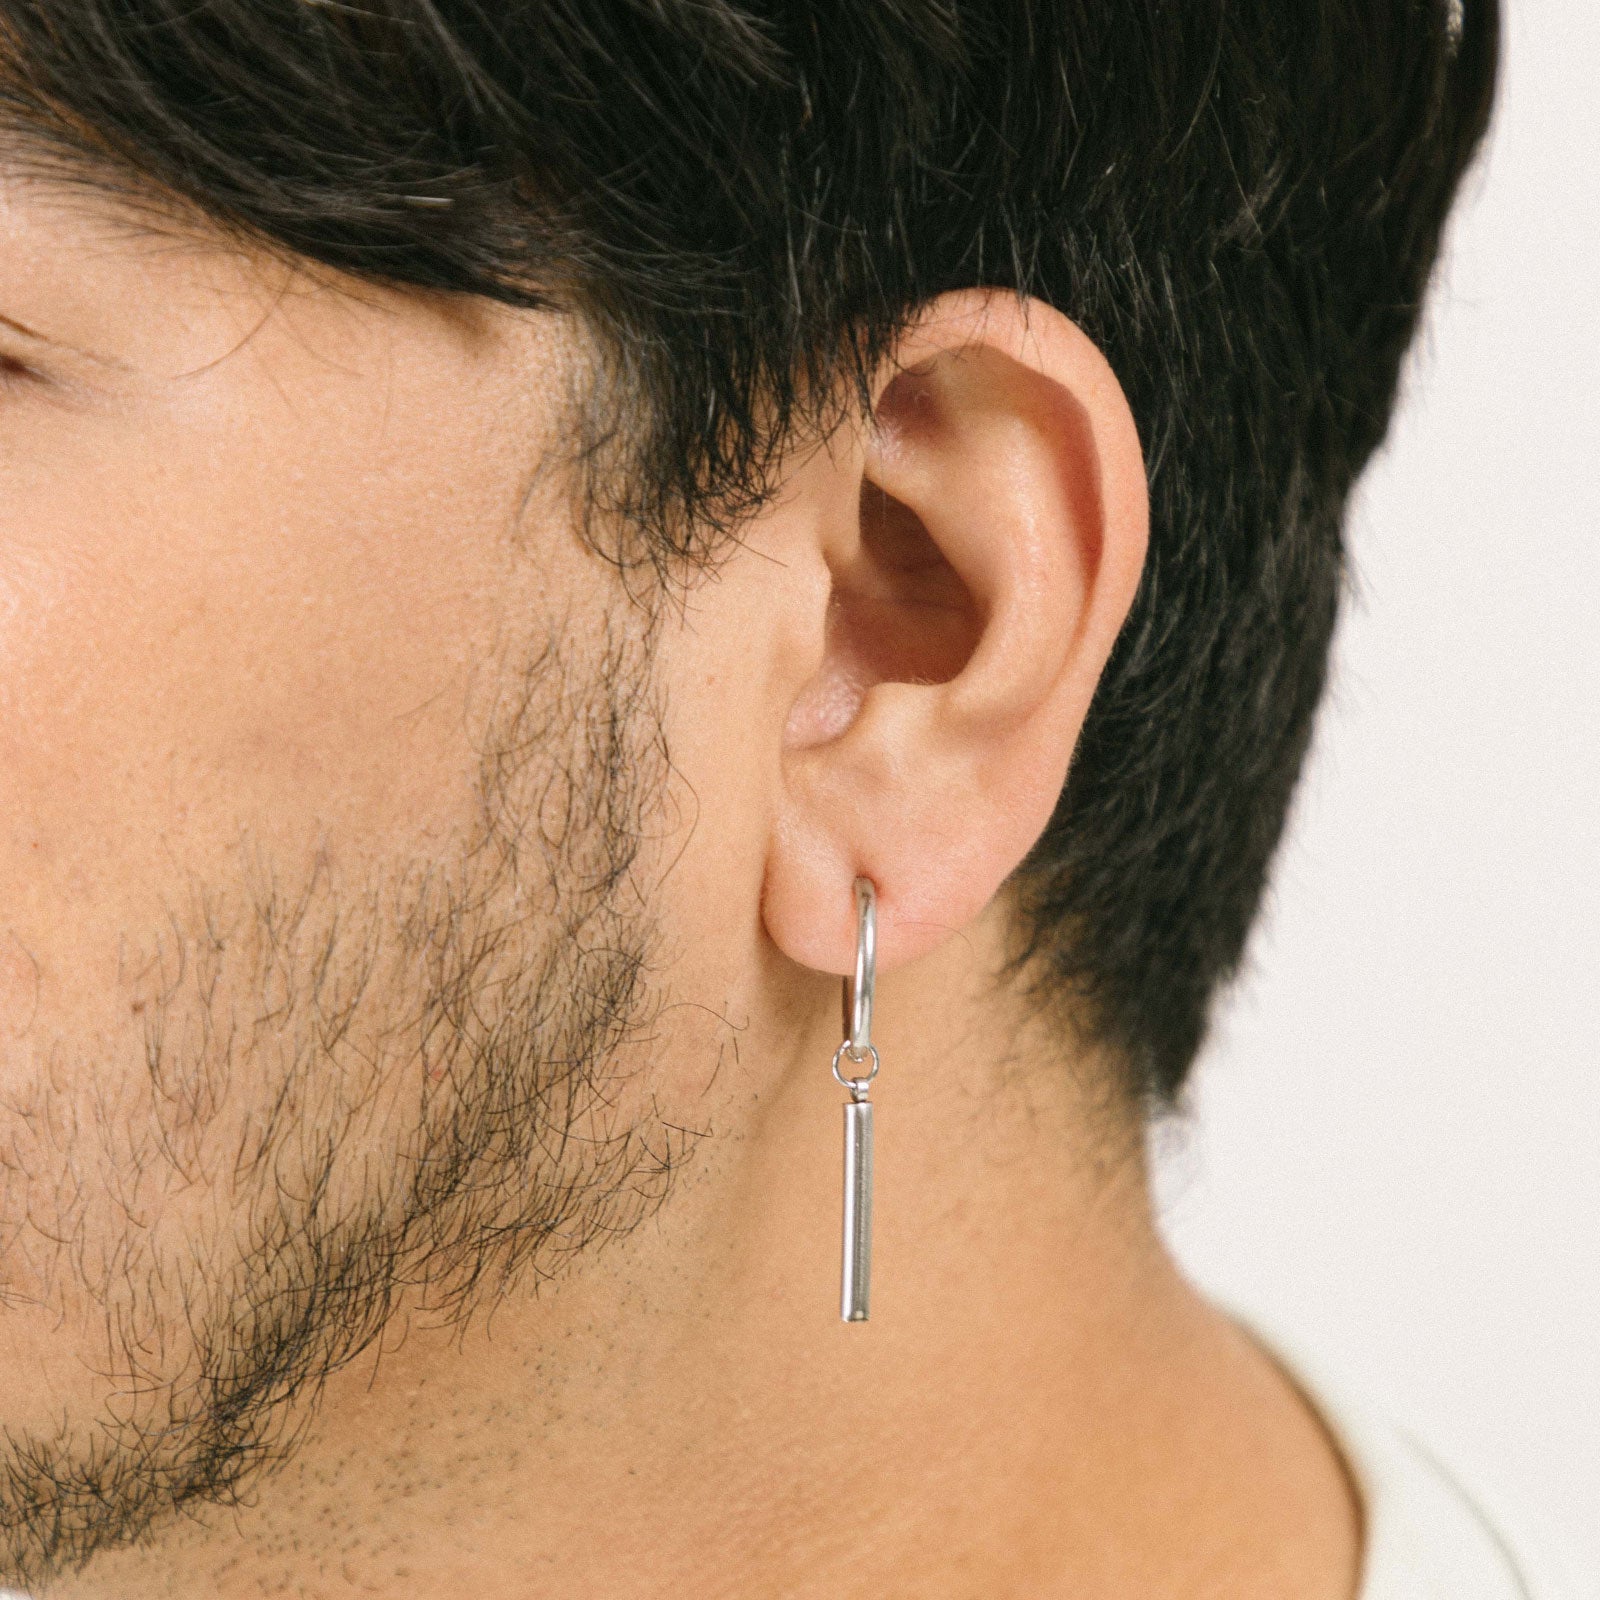 A model wearing Bar Clip On Earrings, designed to perfectly adorn those with slender and delicate ear lobes, the Bar Clip On Earrings are crafted from stainless steel for long-lasting shimmer and secured with a sliding spring-type closure.